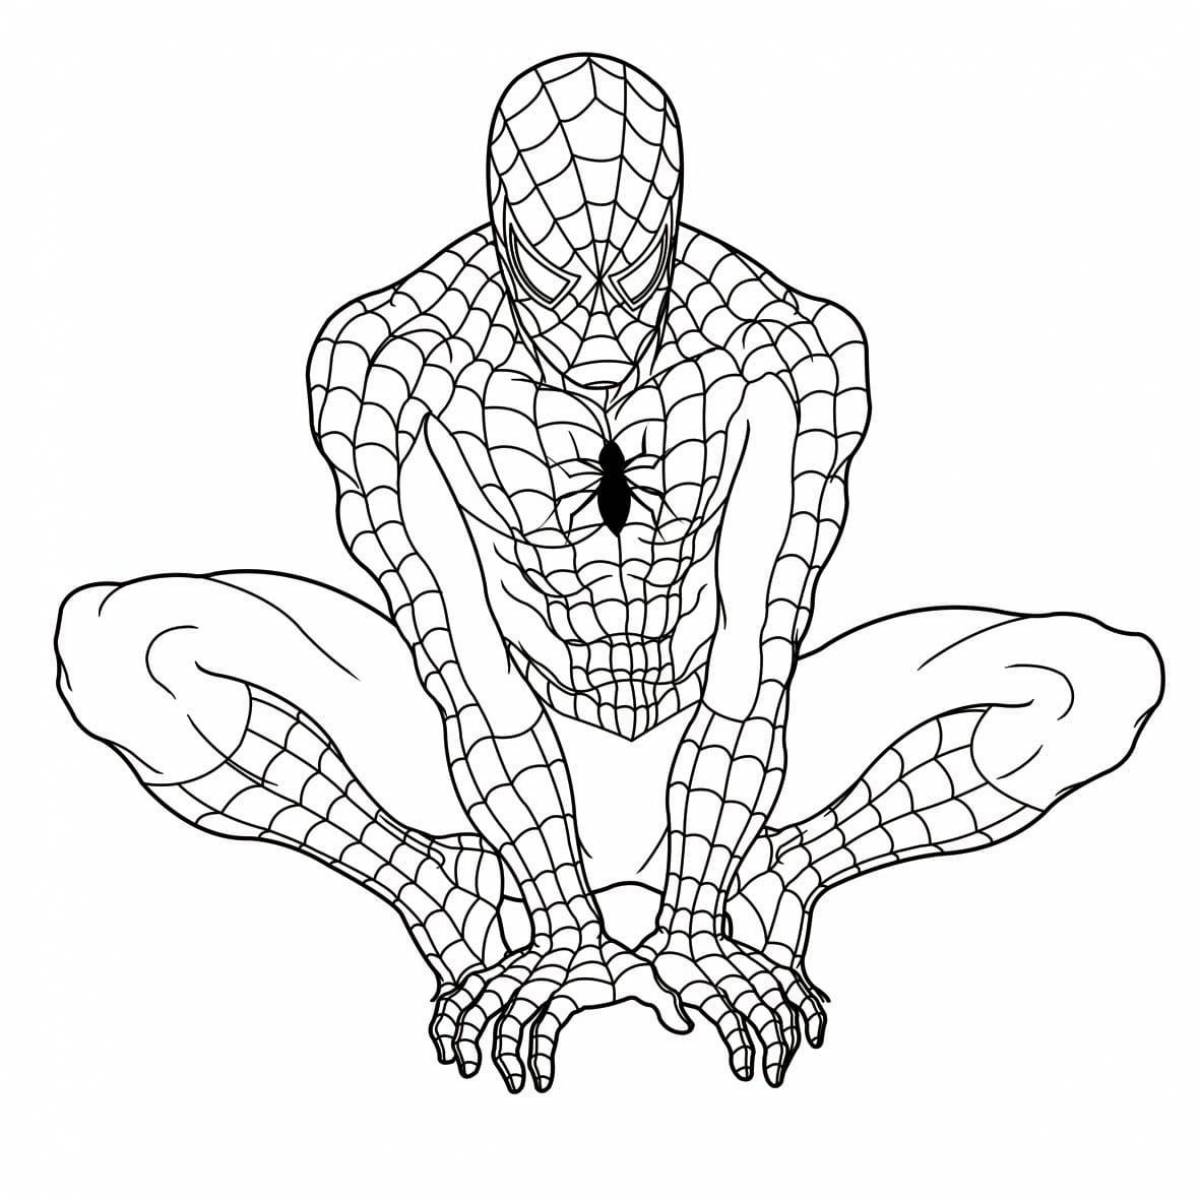 Playful Spiderman Coloring Page for Boys